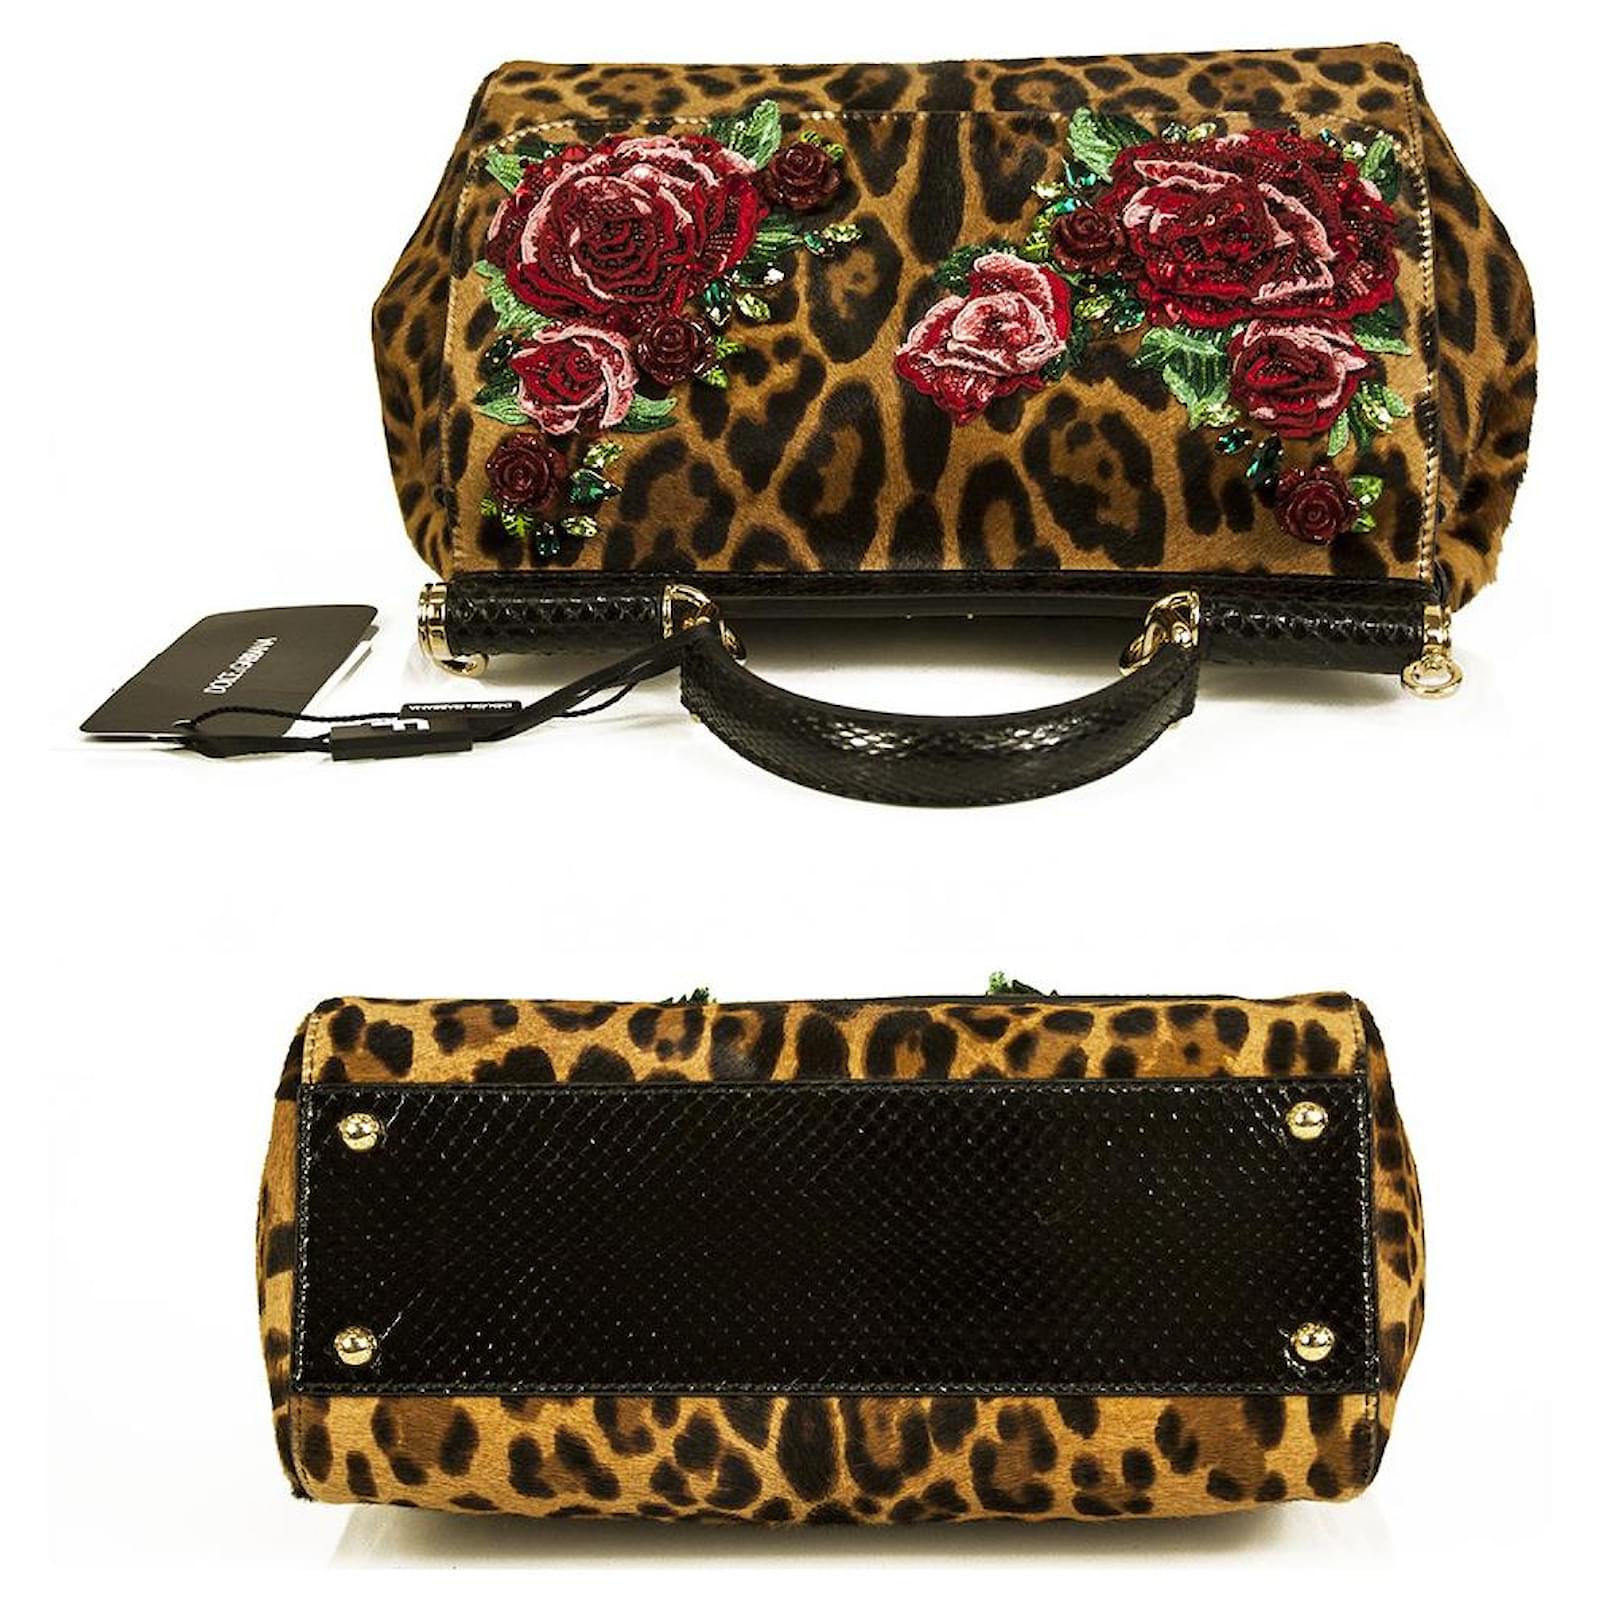 Dolce & Gabbana Leopard Printed Pony Fur Decorated with Roses